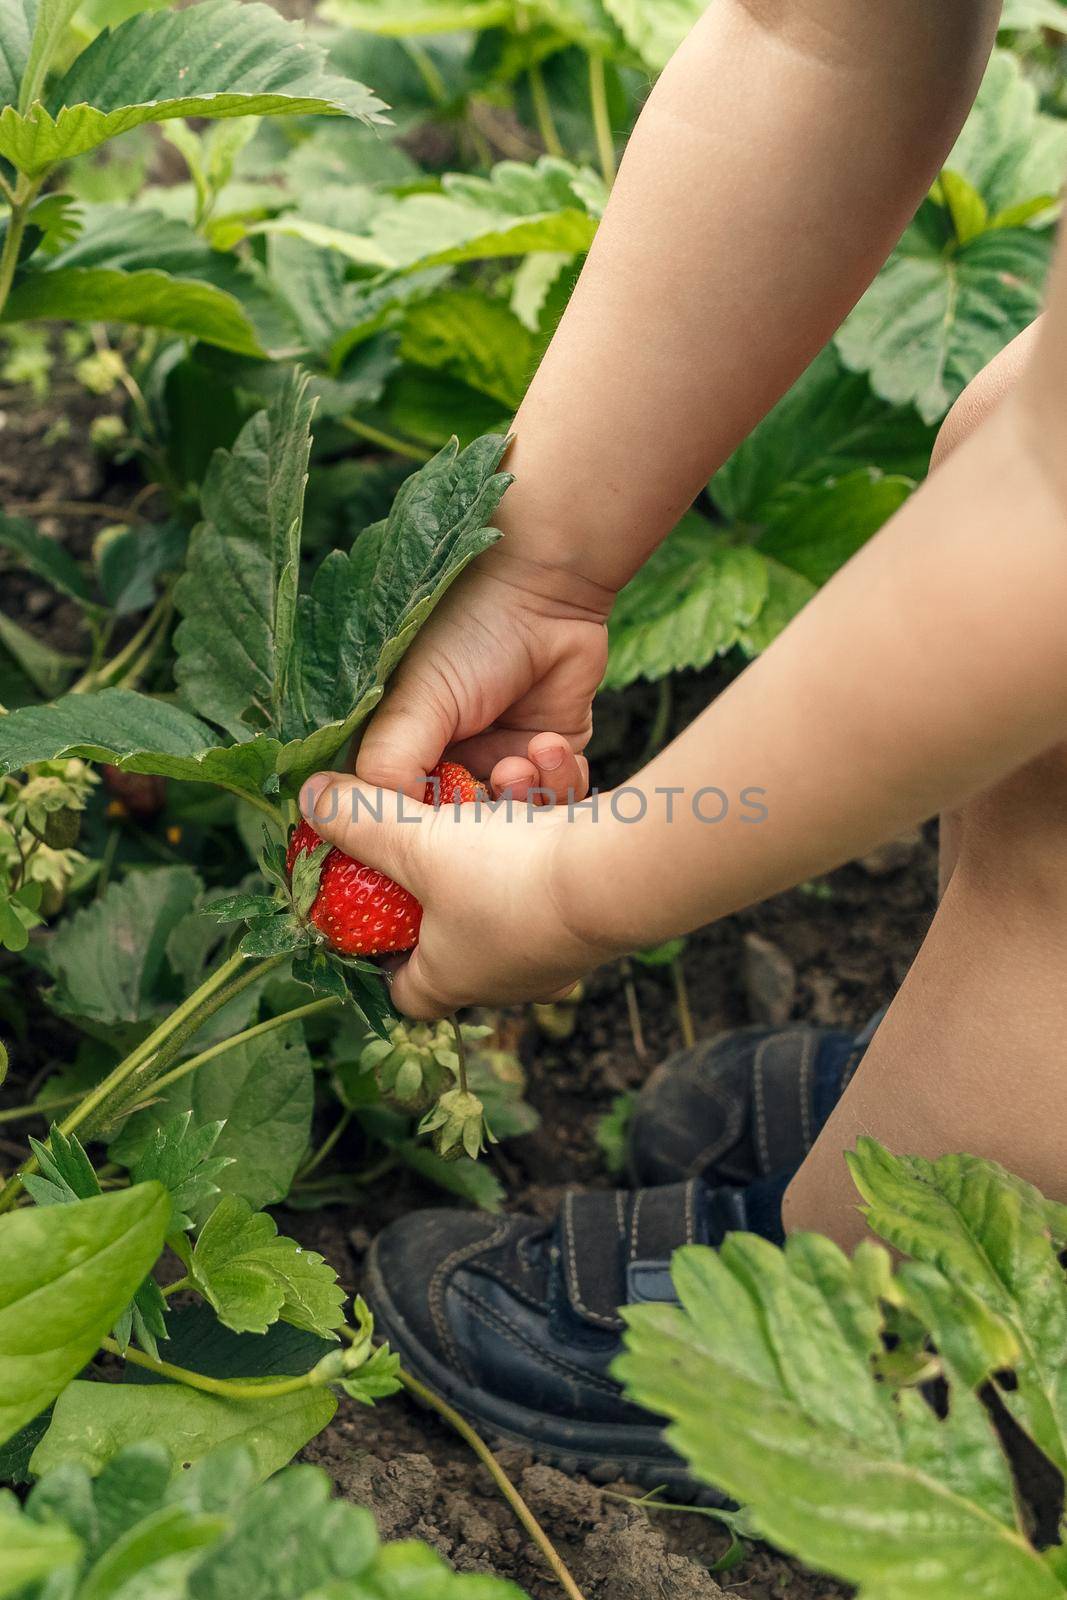 Litlle boy picking strawberries in the garden by Syvanych